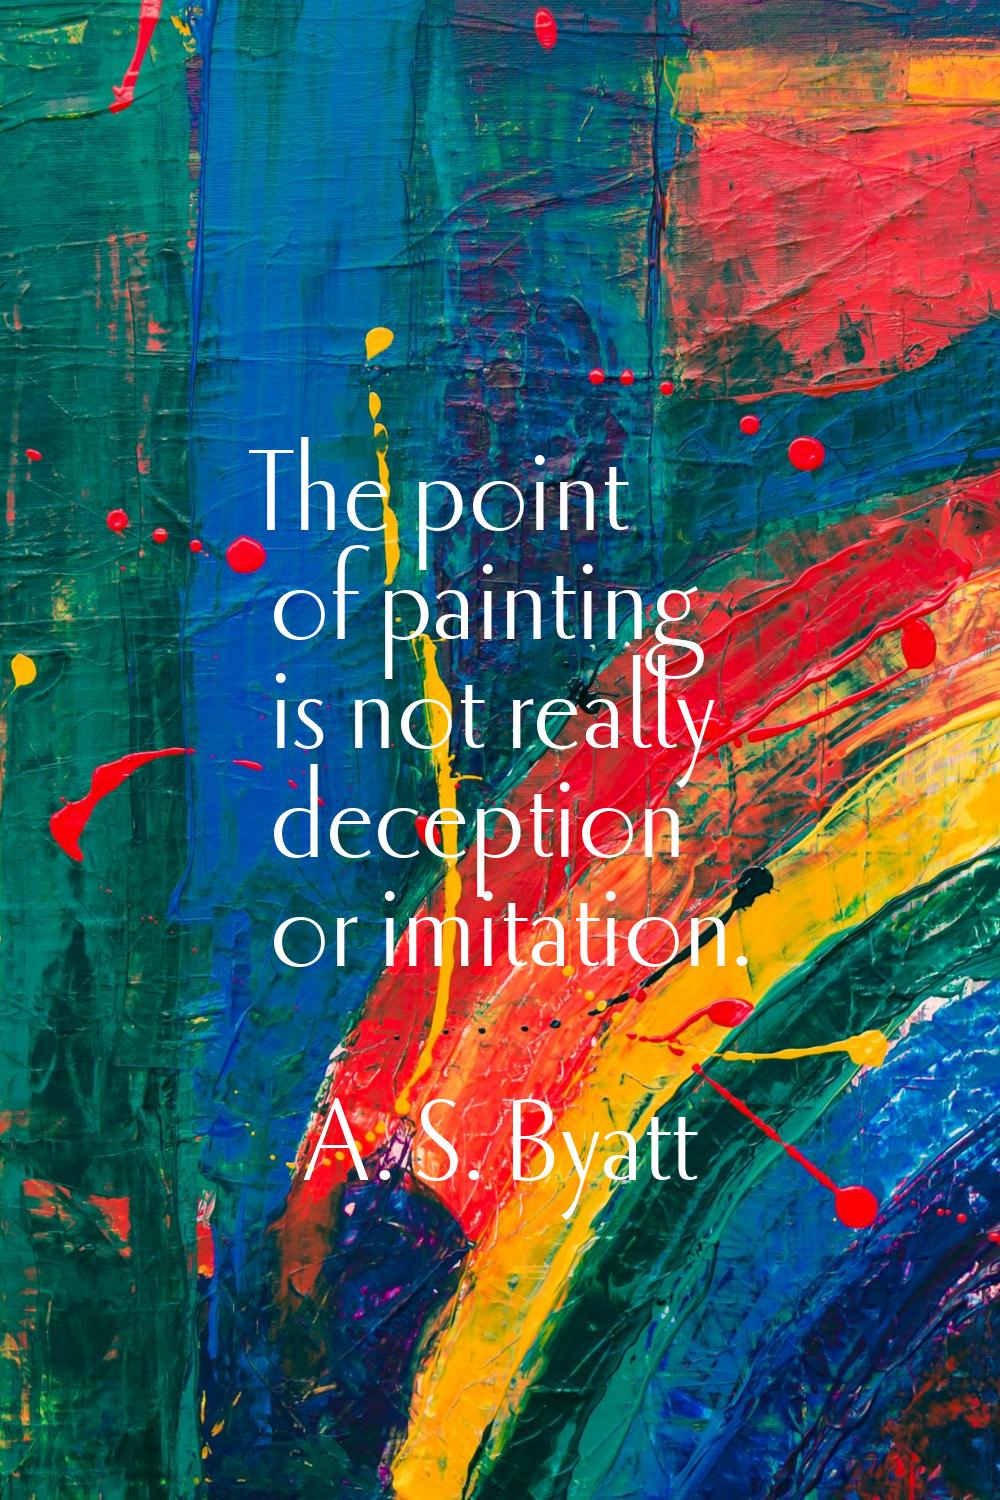 The point of painting is not really deception or imitation.